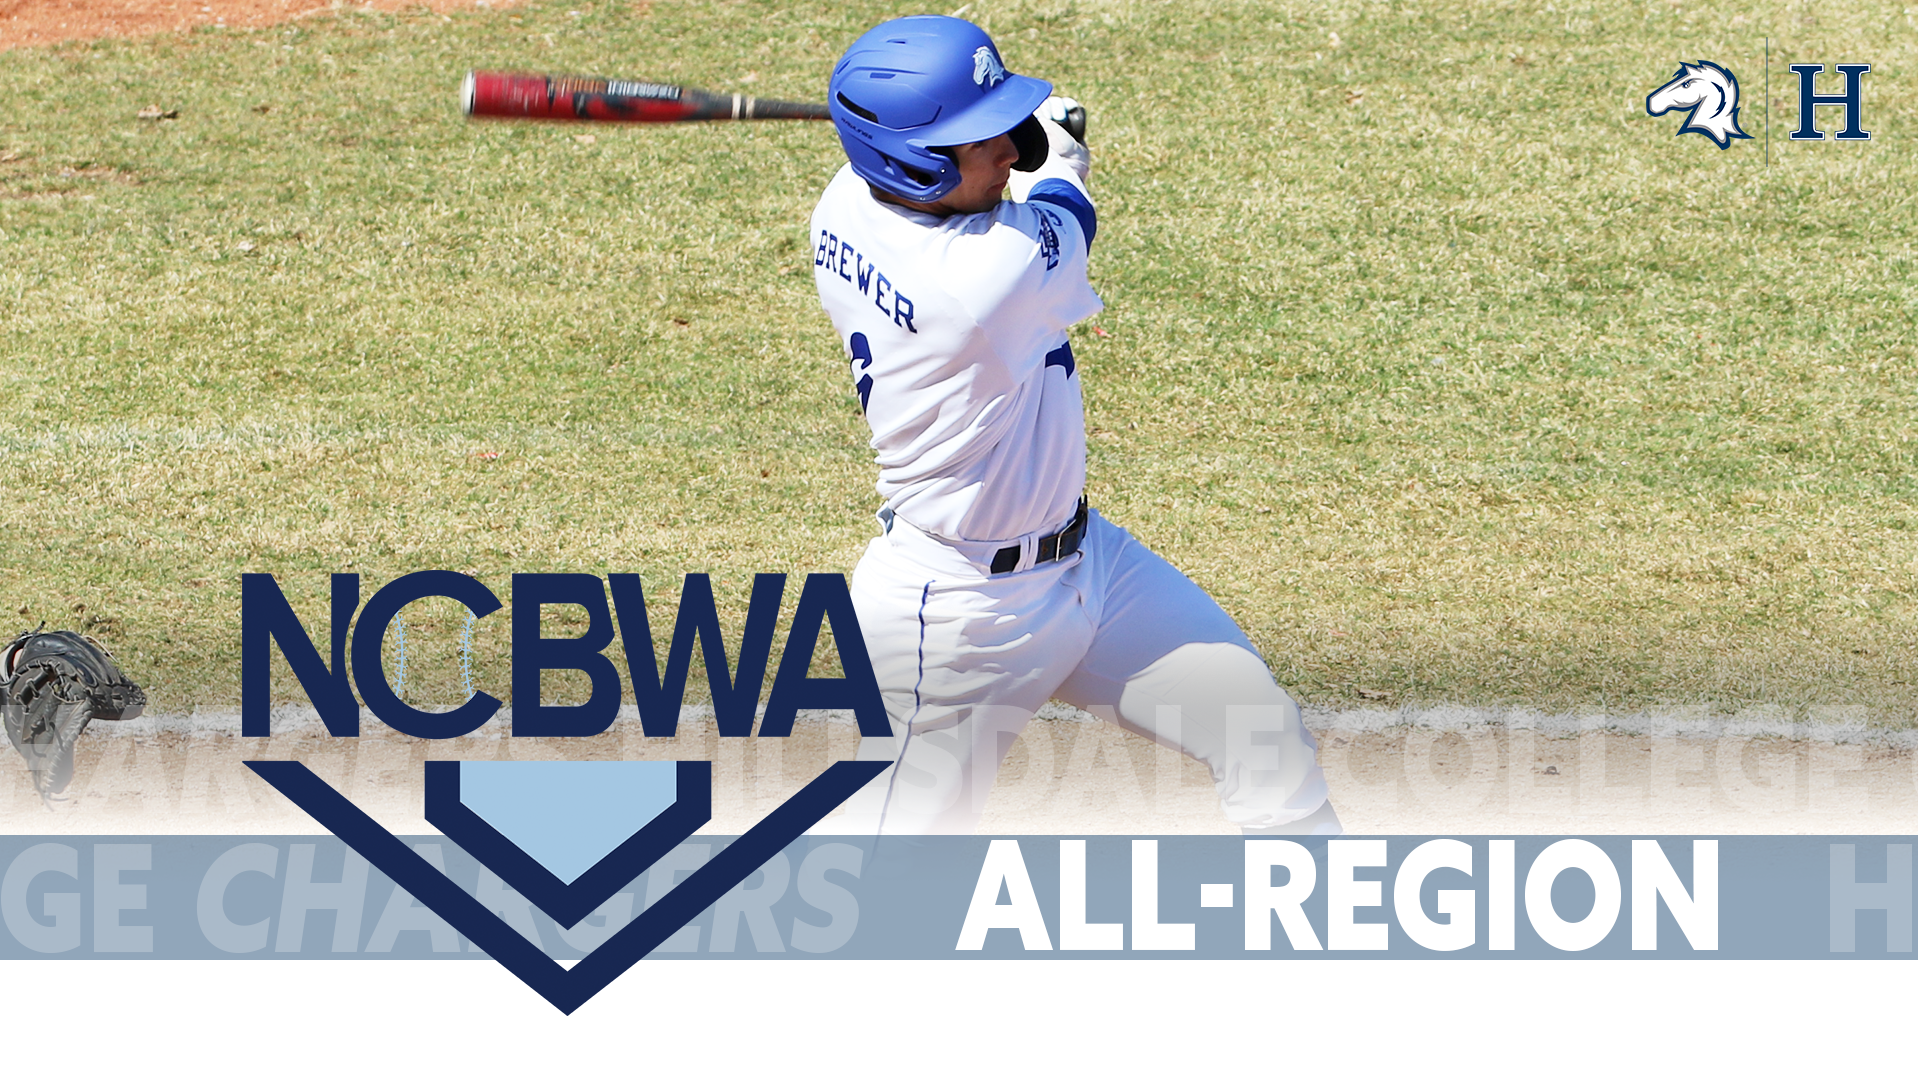 Brewer earns All-Midwest Region honors from NCBWA; Beals named honorable mention